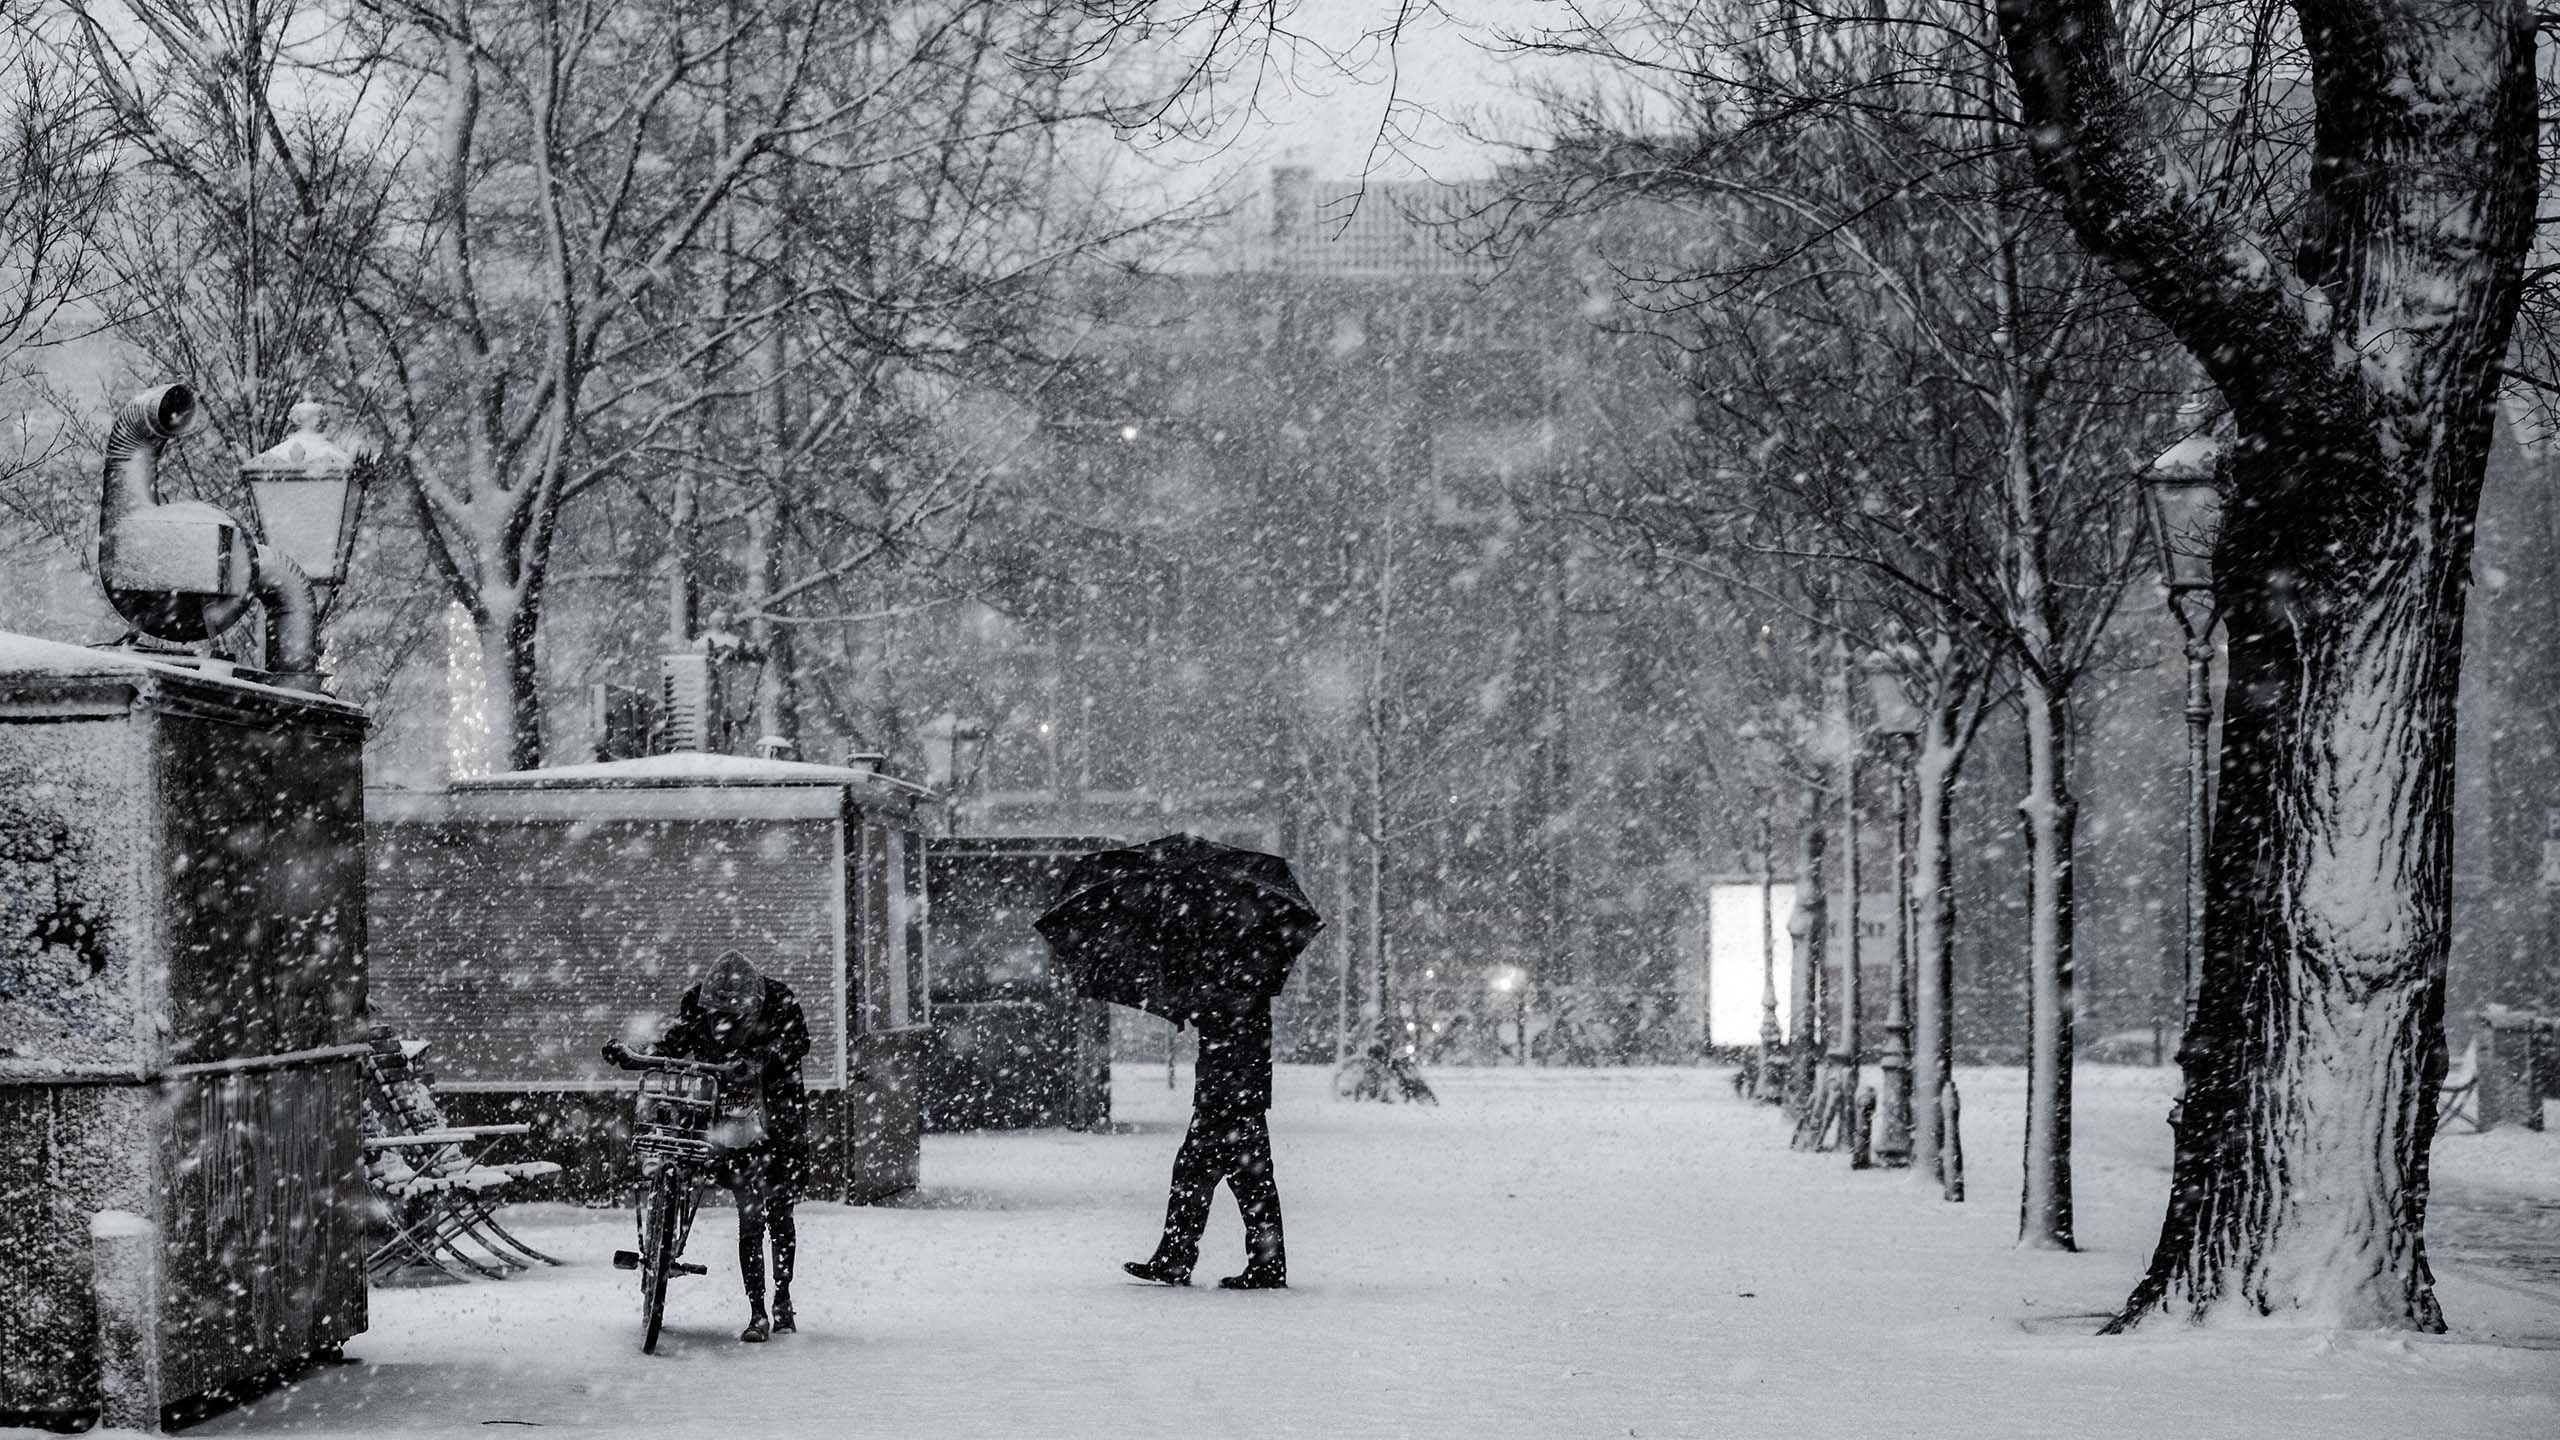 General 2560x1440 snowing monochrome park Charl Van Rooy winter